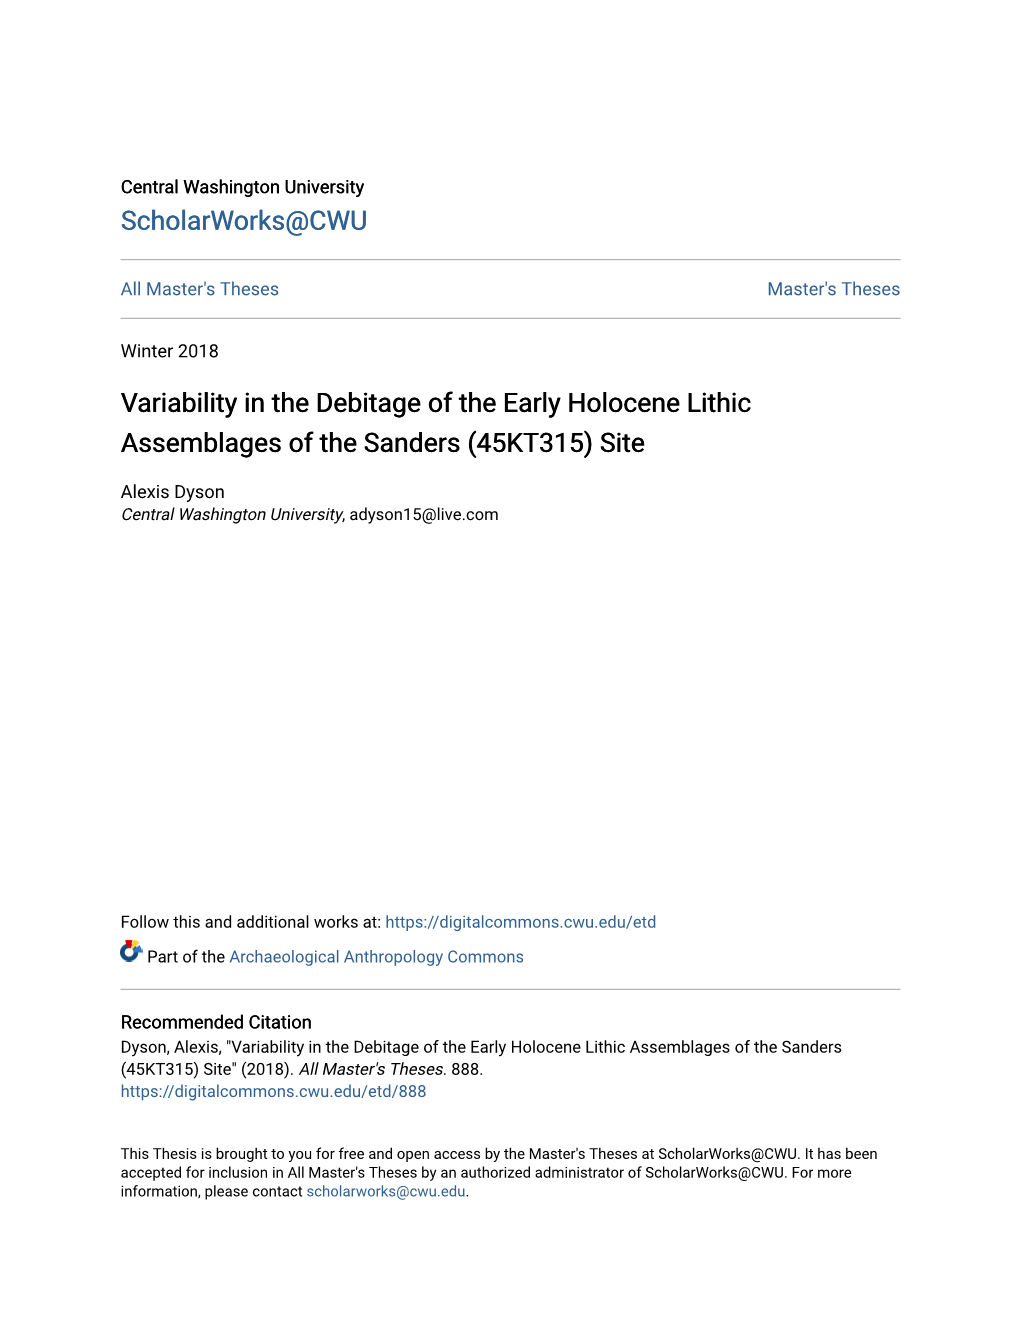 Variability in the Debitage of the Early Holocene Lithic Assemblages of the Sanders (45KT315) Site